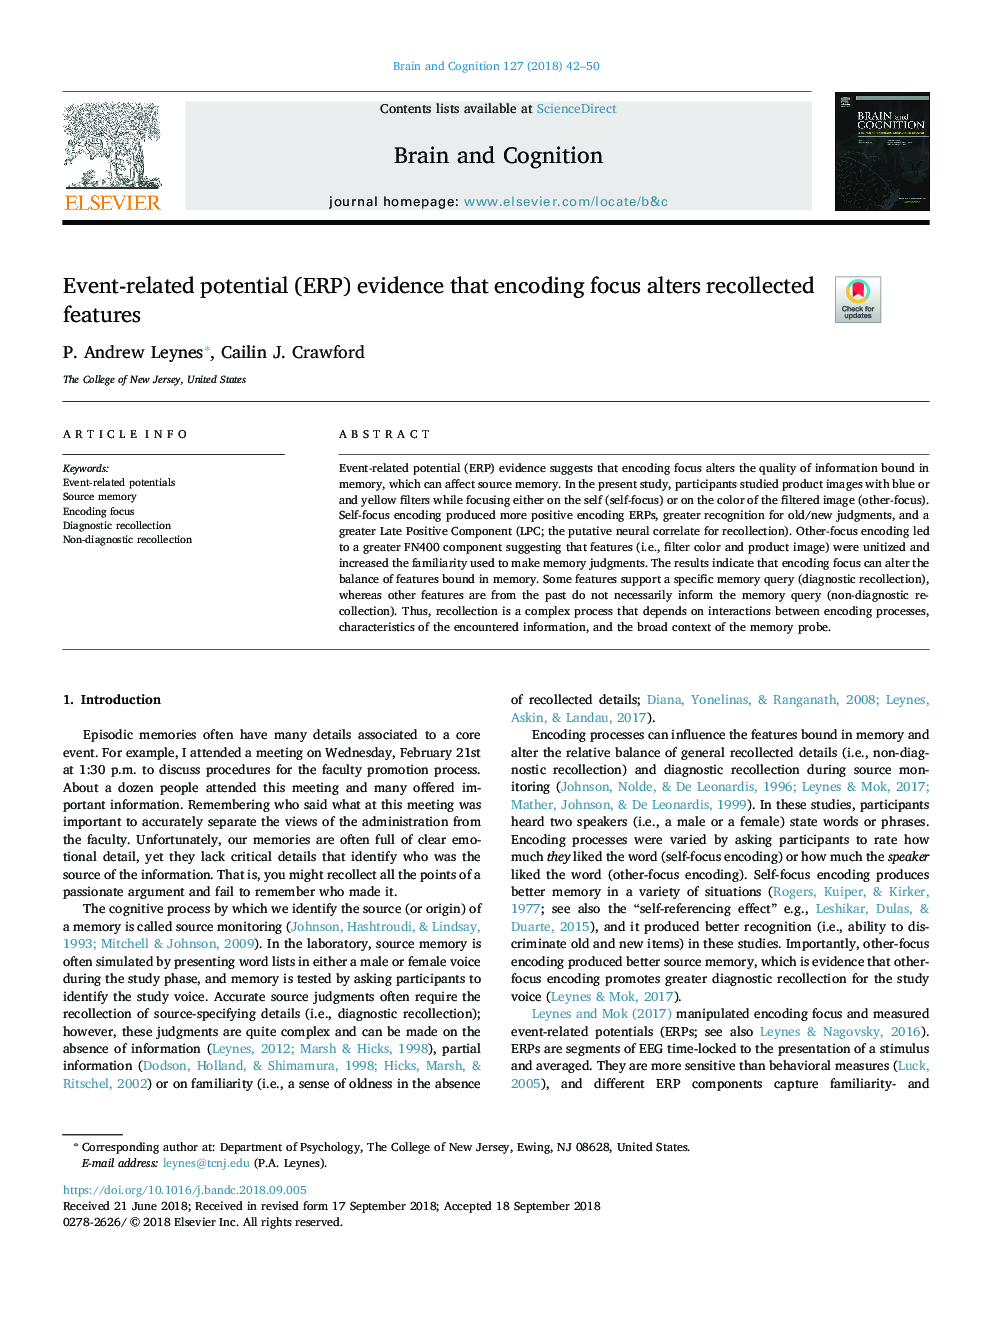 Event-related potential (ERP) evidence that encoding focus alters recollected features